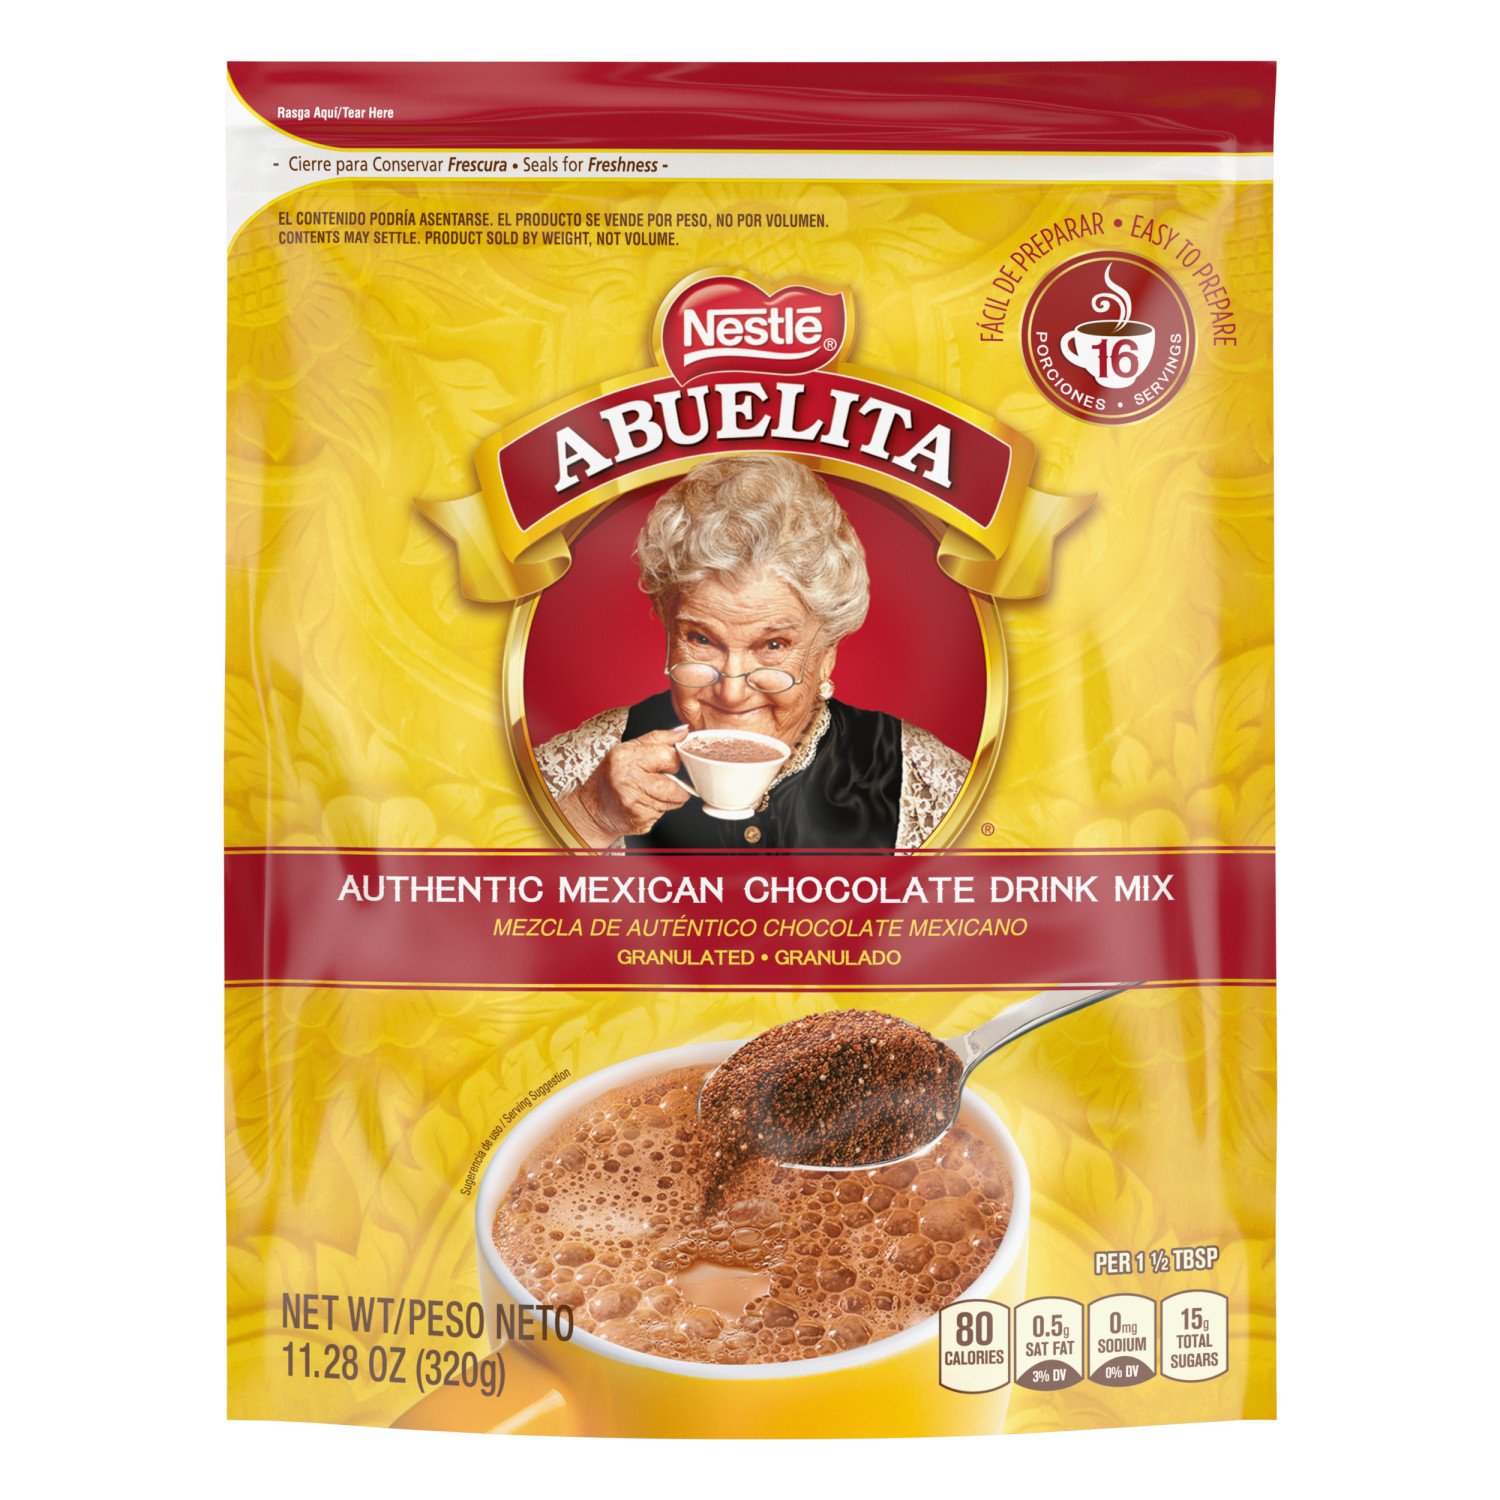 Nestle Abuelita Authentic Mexican Hot Chocolate Granulated Mix Shop Cocoa At H E B 